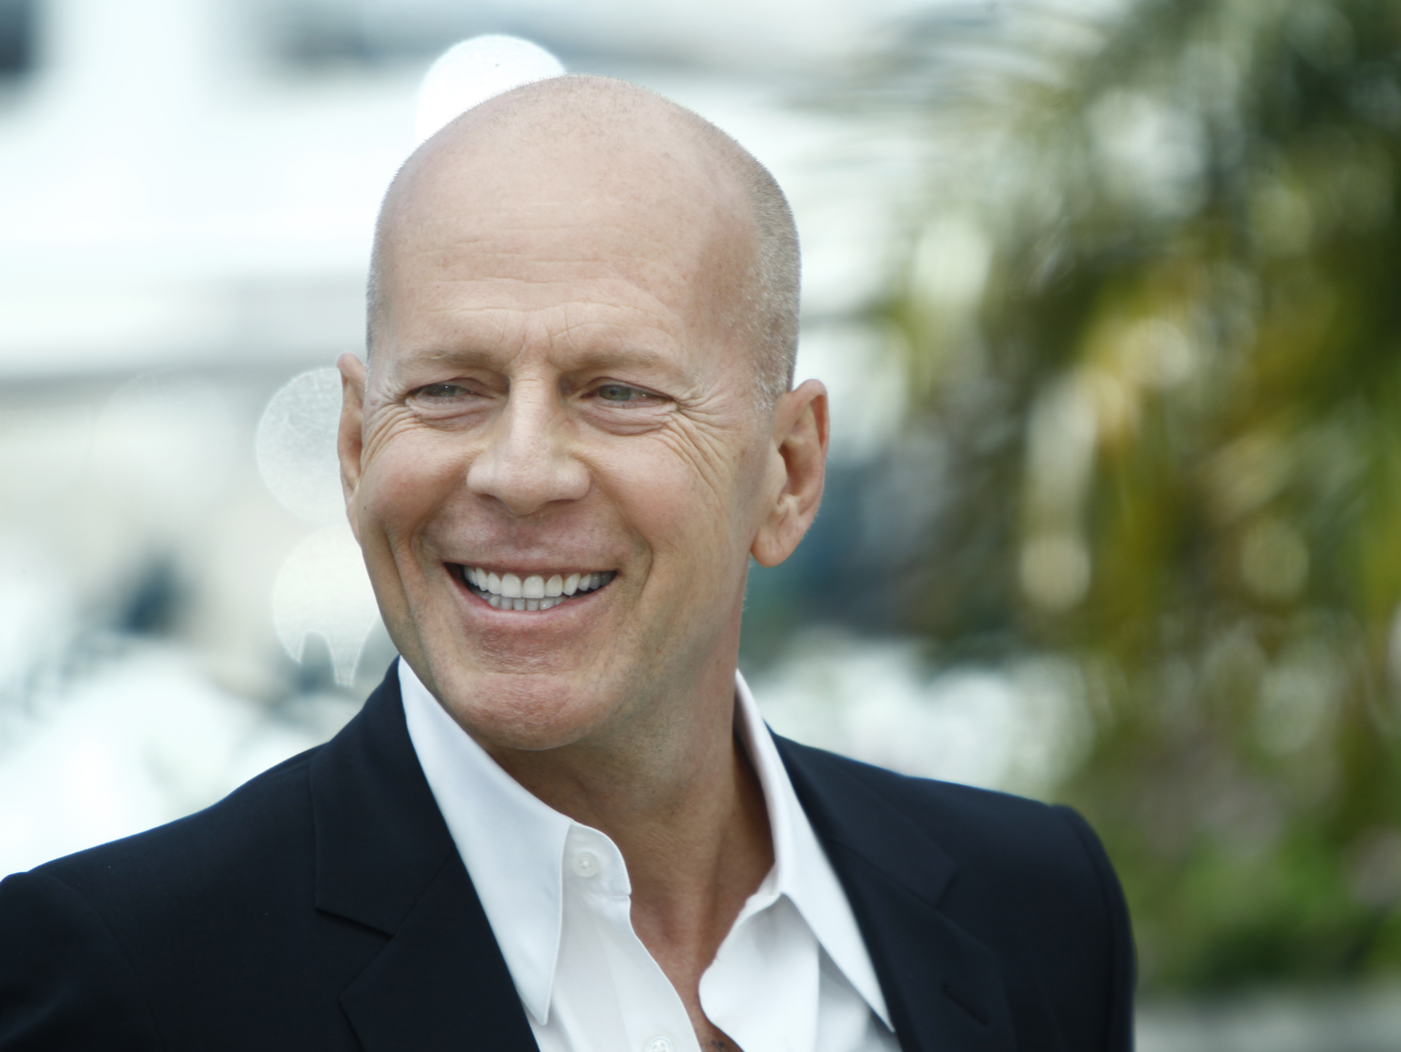 Bruce Willis smiling in a chic black suit with a white shirt